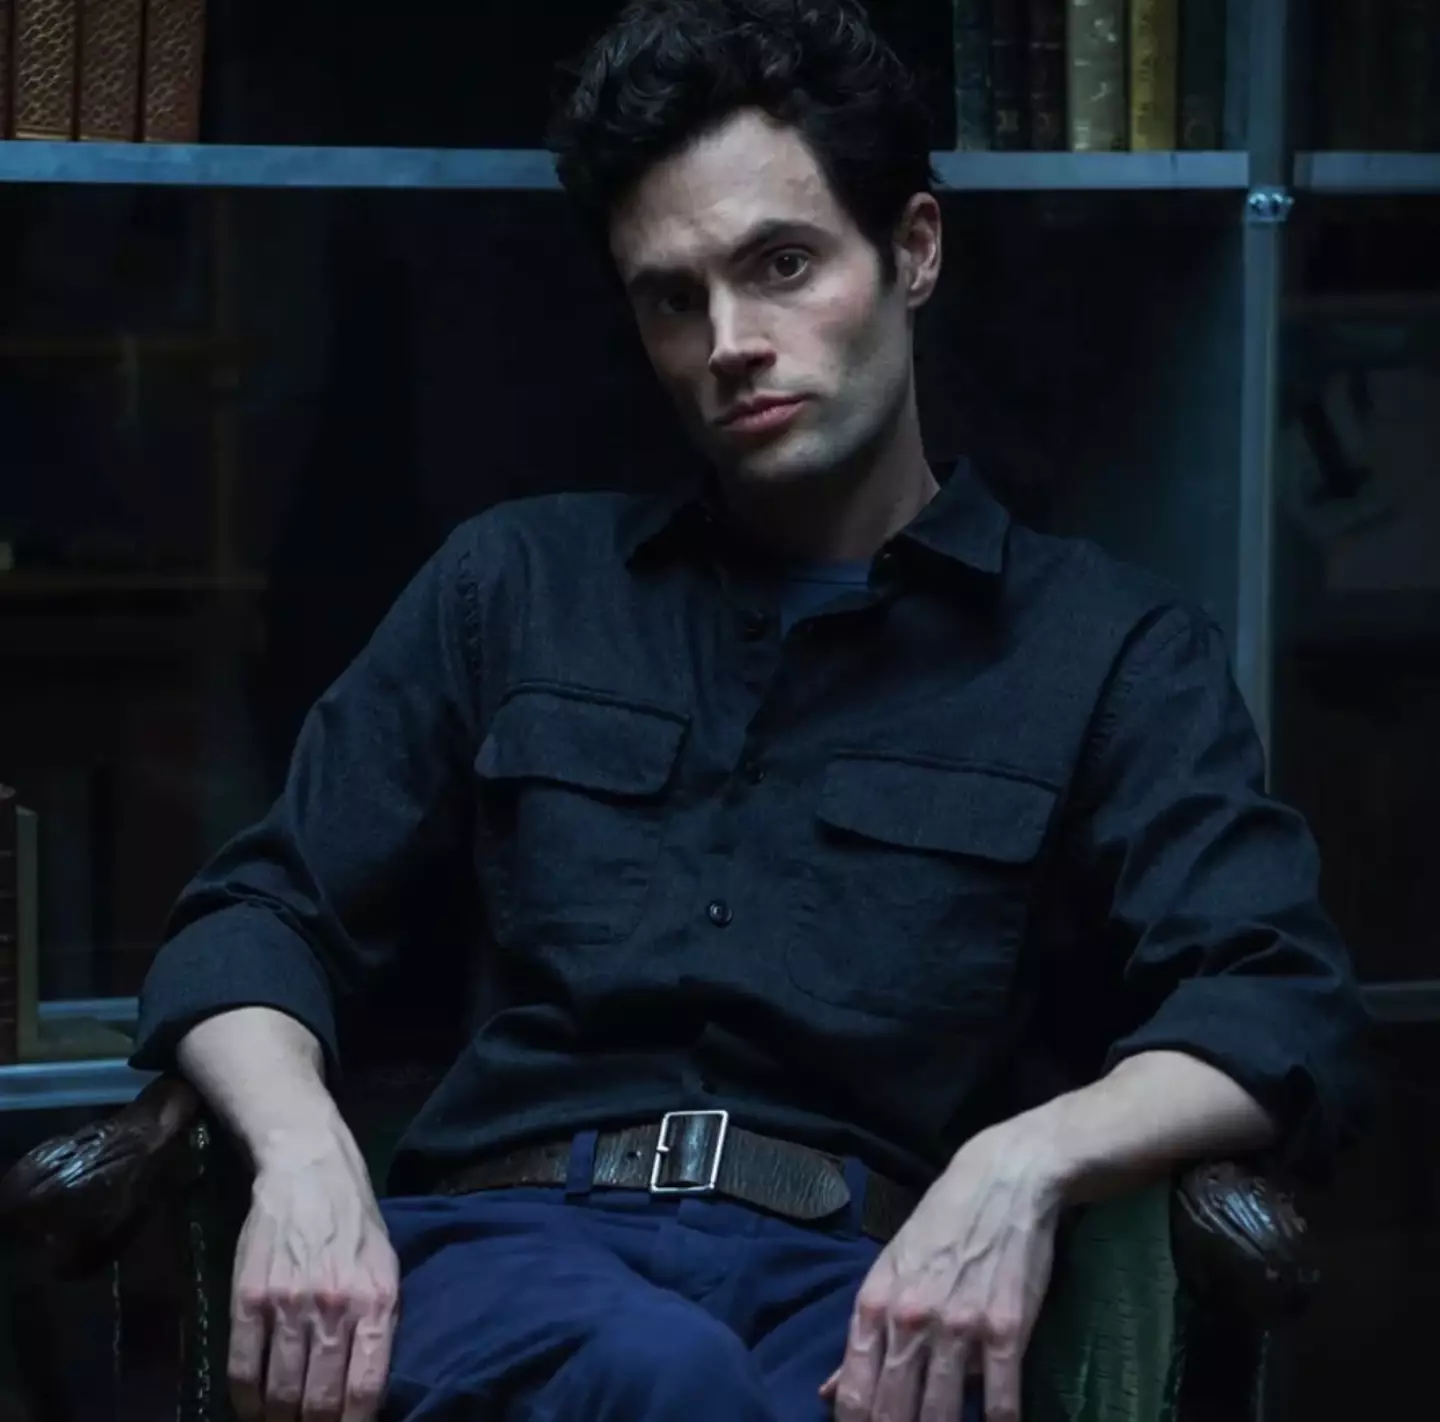 Penn Badgley asked for less 'intimacy scenes' before season four of You started filming.